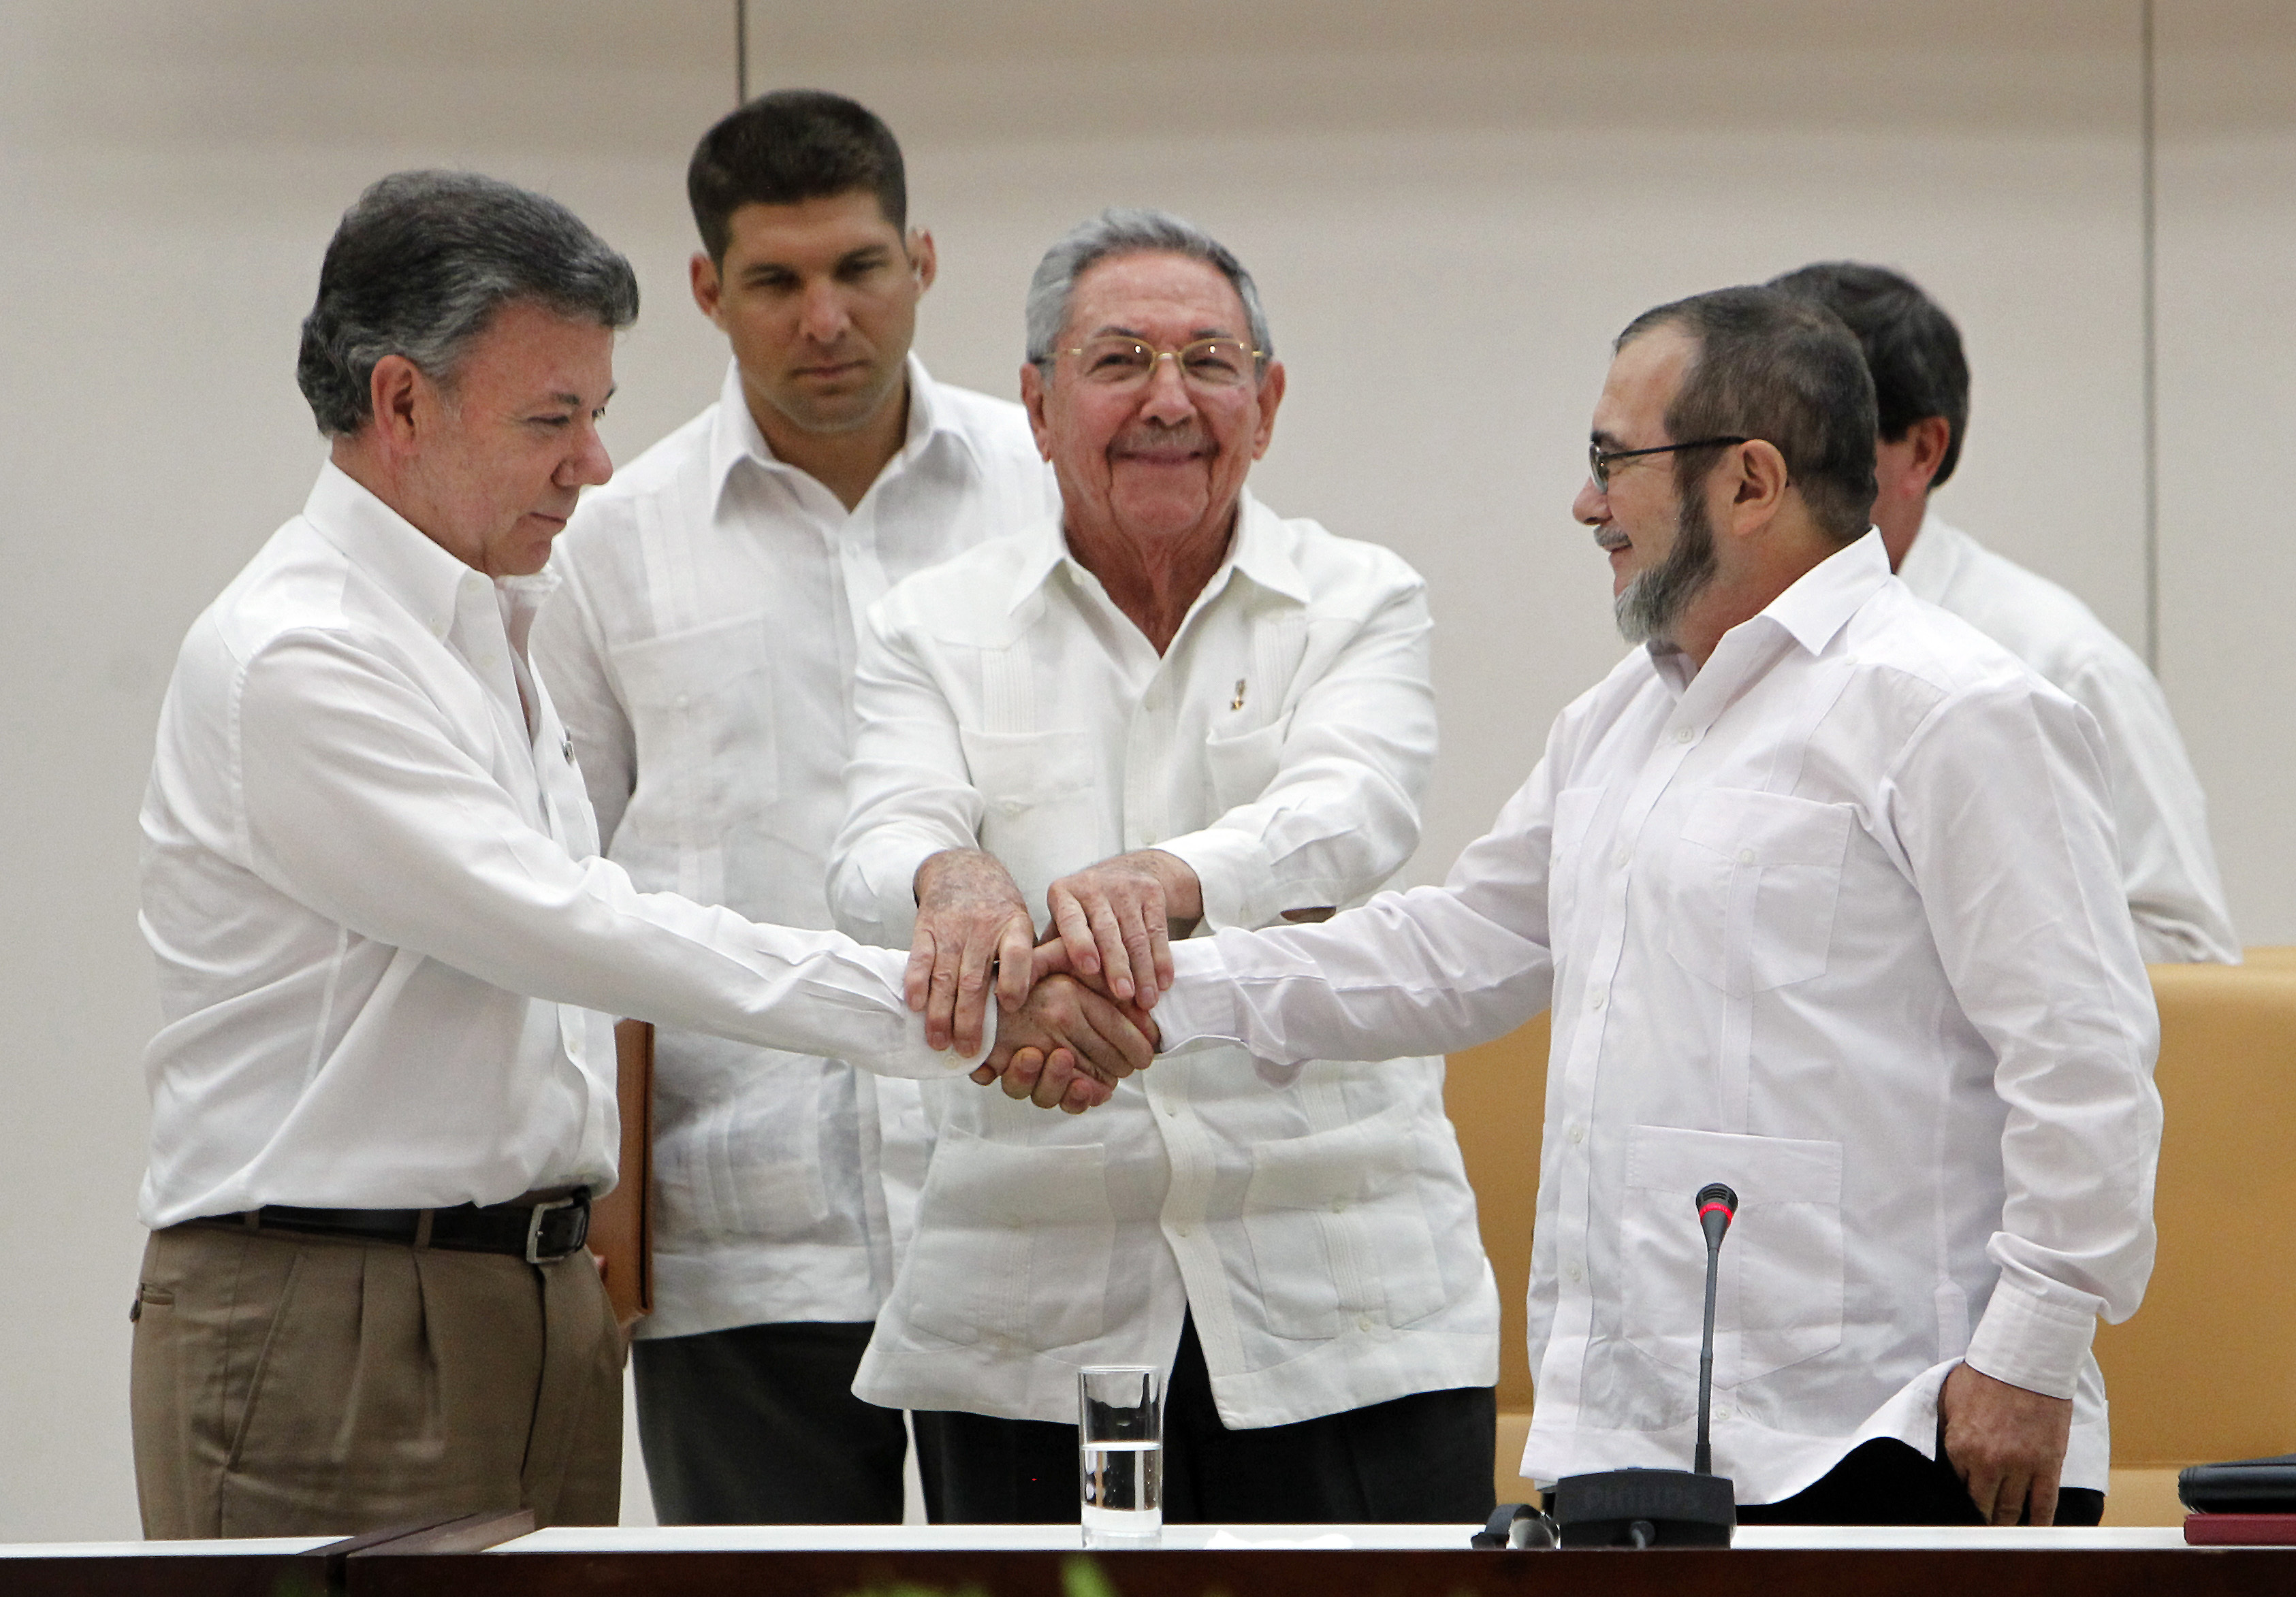 Juan Manuel Santos, president of Colombia (L), Raul Castro, President of Cuba (C) and Rodrigo Londoño, known as "Timoshenko", top leader of the Revolutionary Armed Forces of Colombia (FARC) , shake hands during a meeting about transitional justice agreement on Sept. 23, 2015 in Havana, Cuba. (Ernesto Mastrascusa—LatinContent/Getty Images)